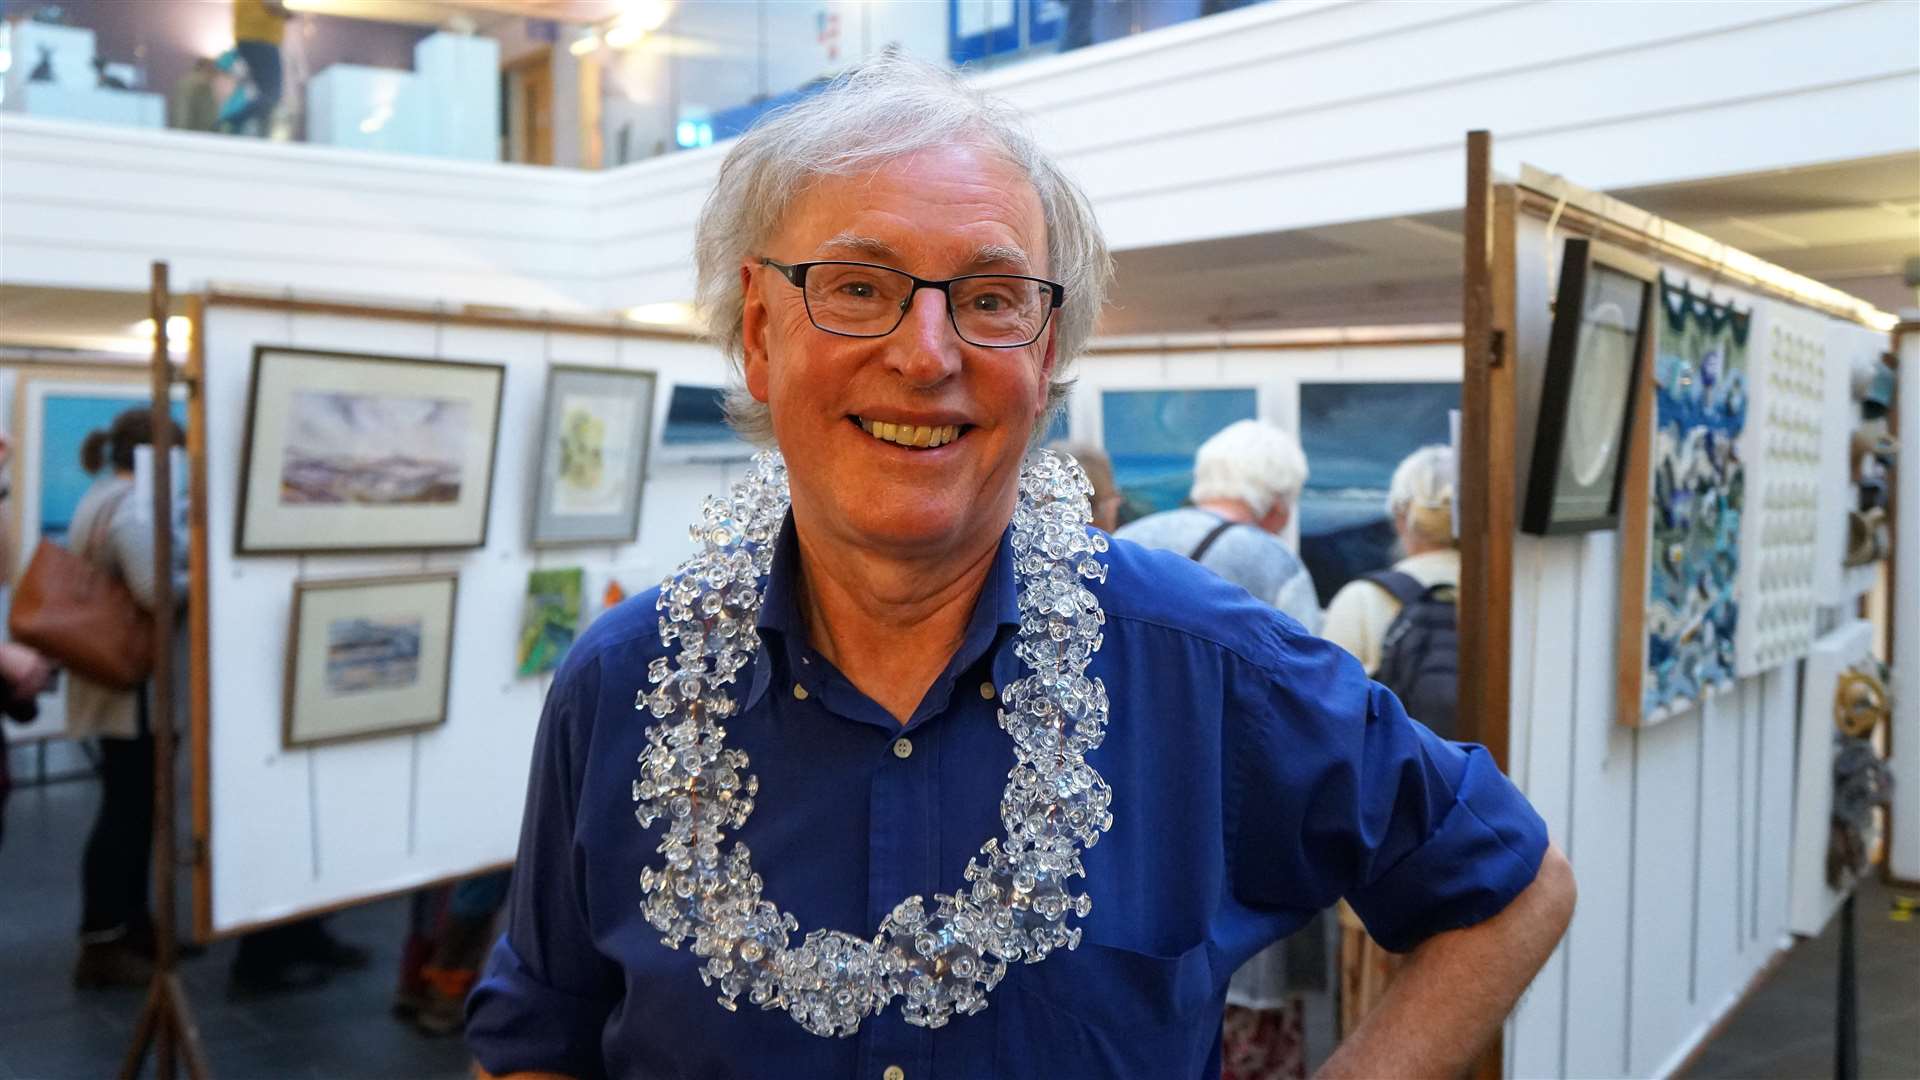 Ian Pearson, chair of the Society of Caithness Artists. Ian wears a glass necklace inspired by microscopic images of the Covid virus. Picture: DGS